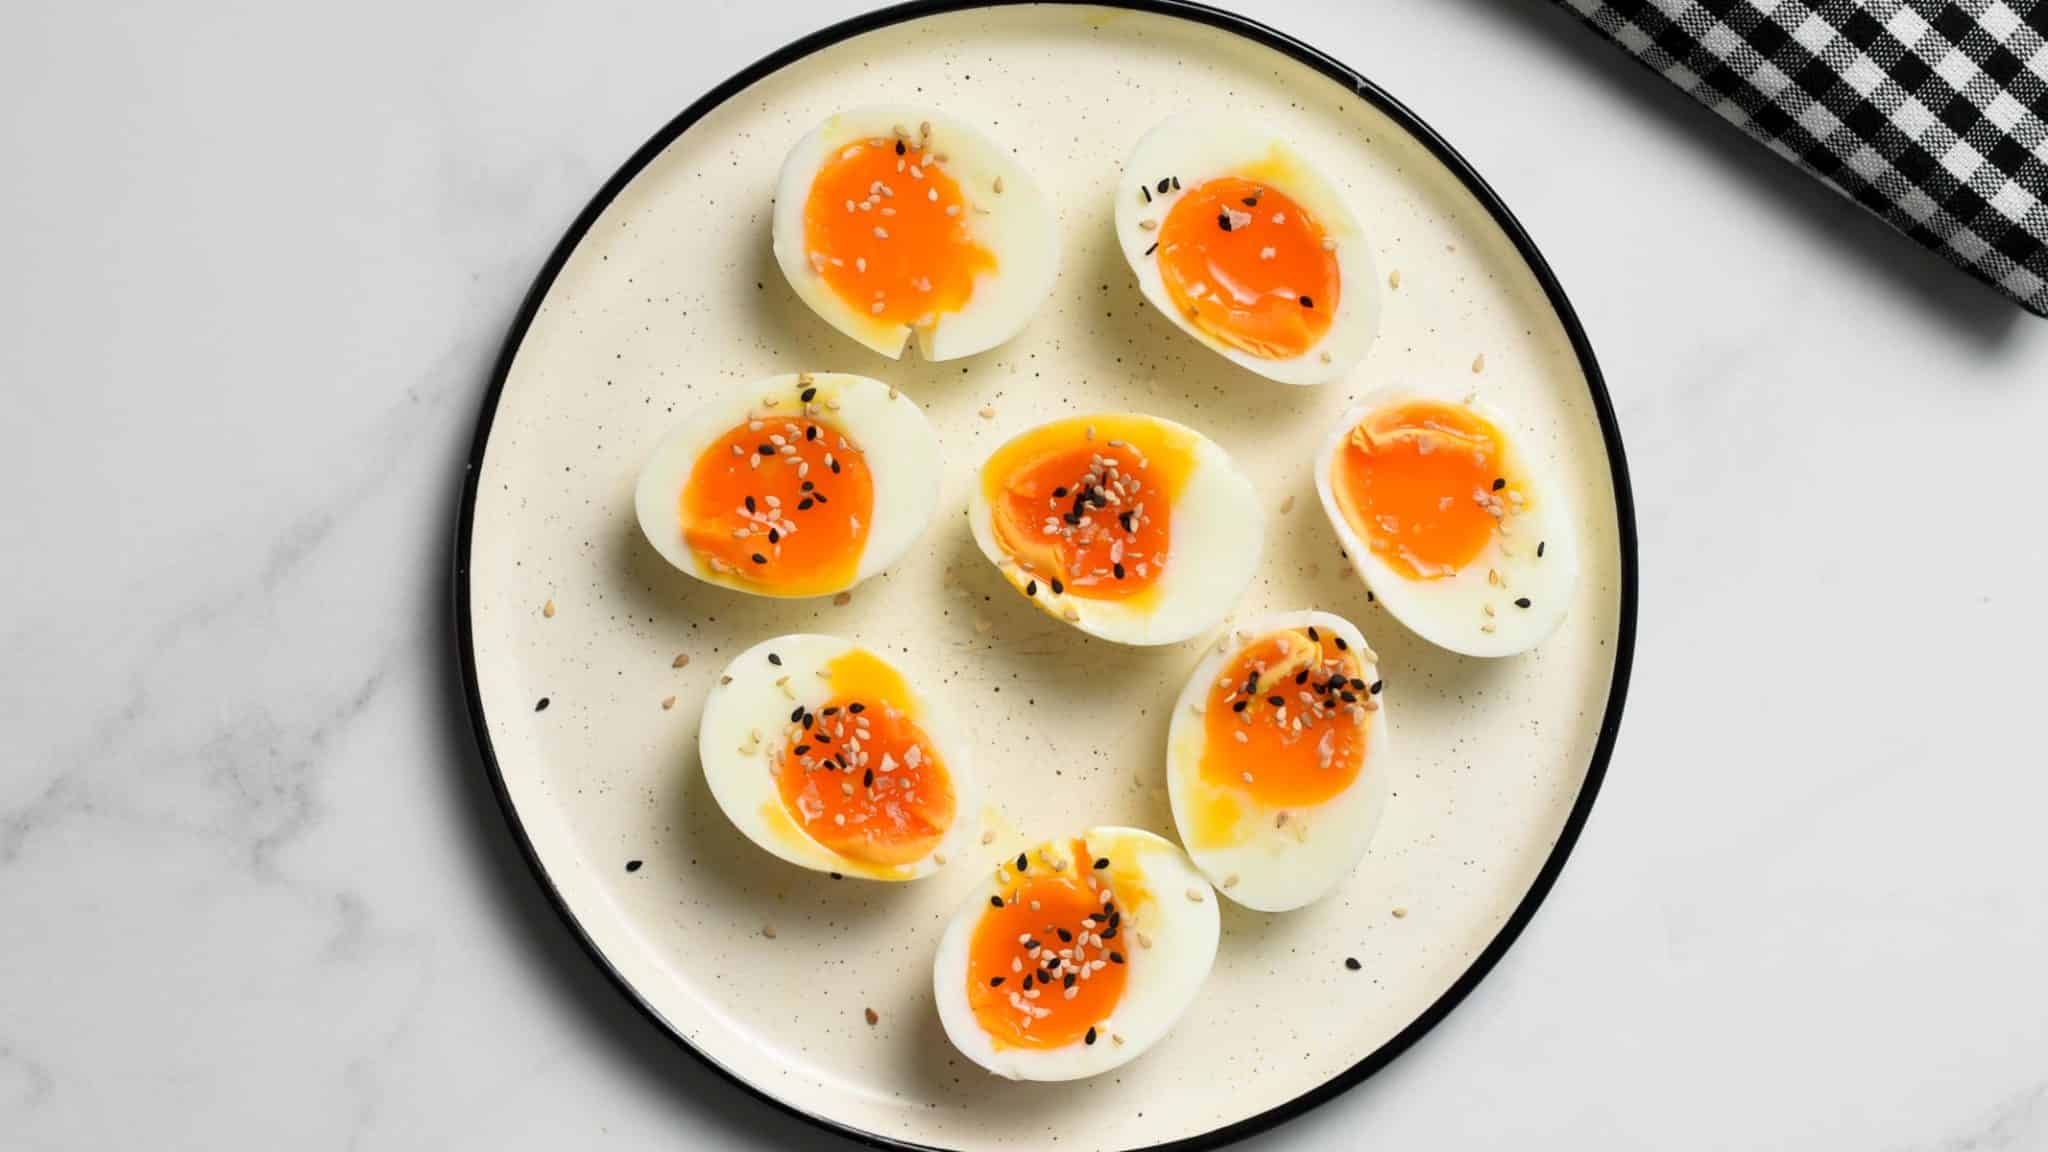 How to make Perfect Jammy Eggs